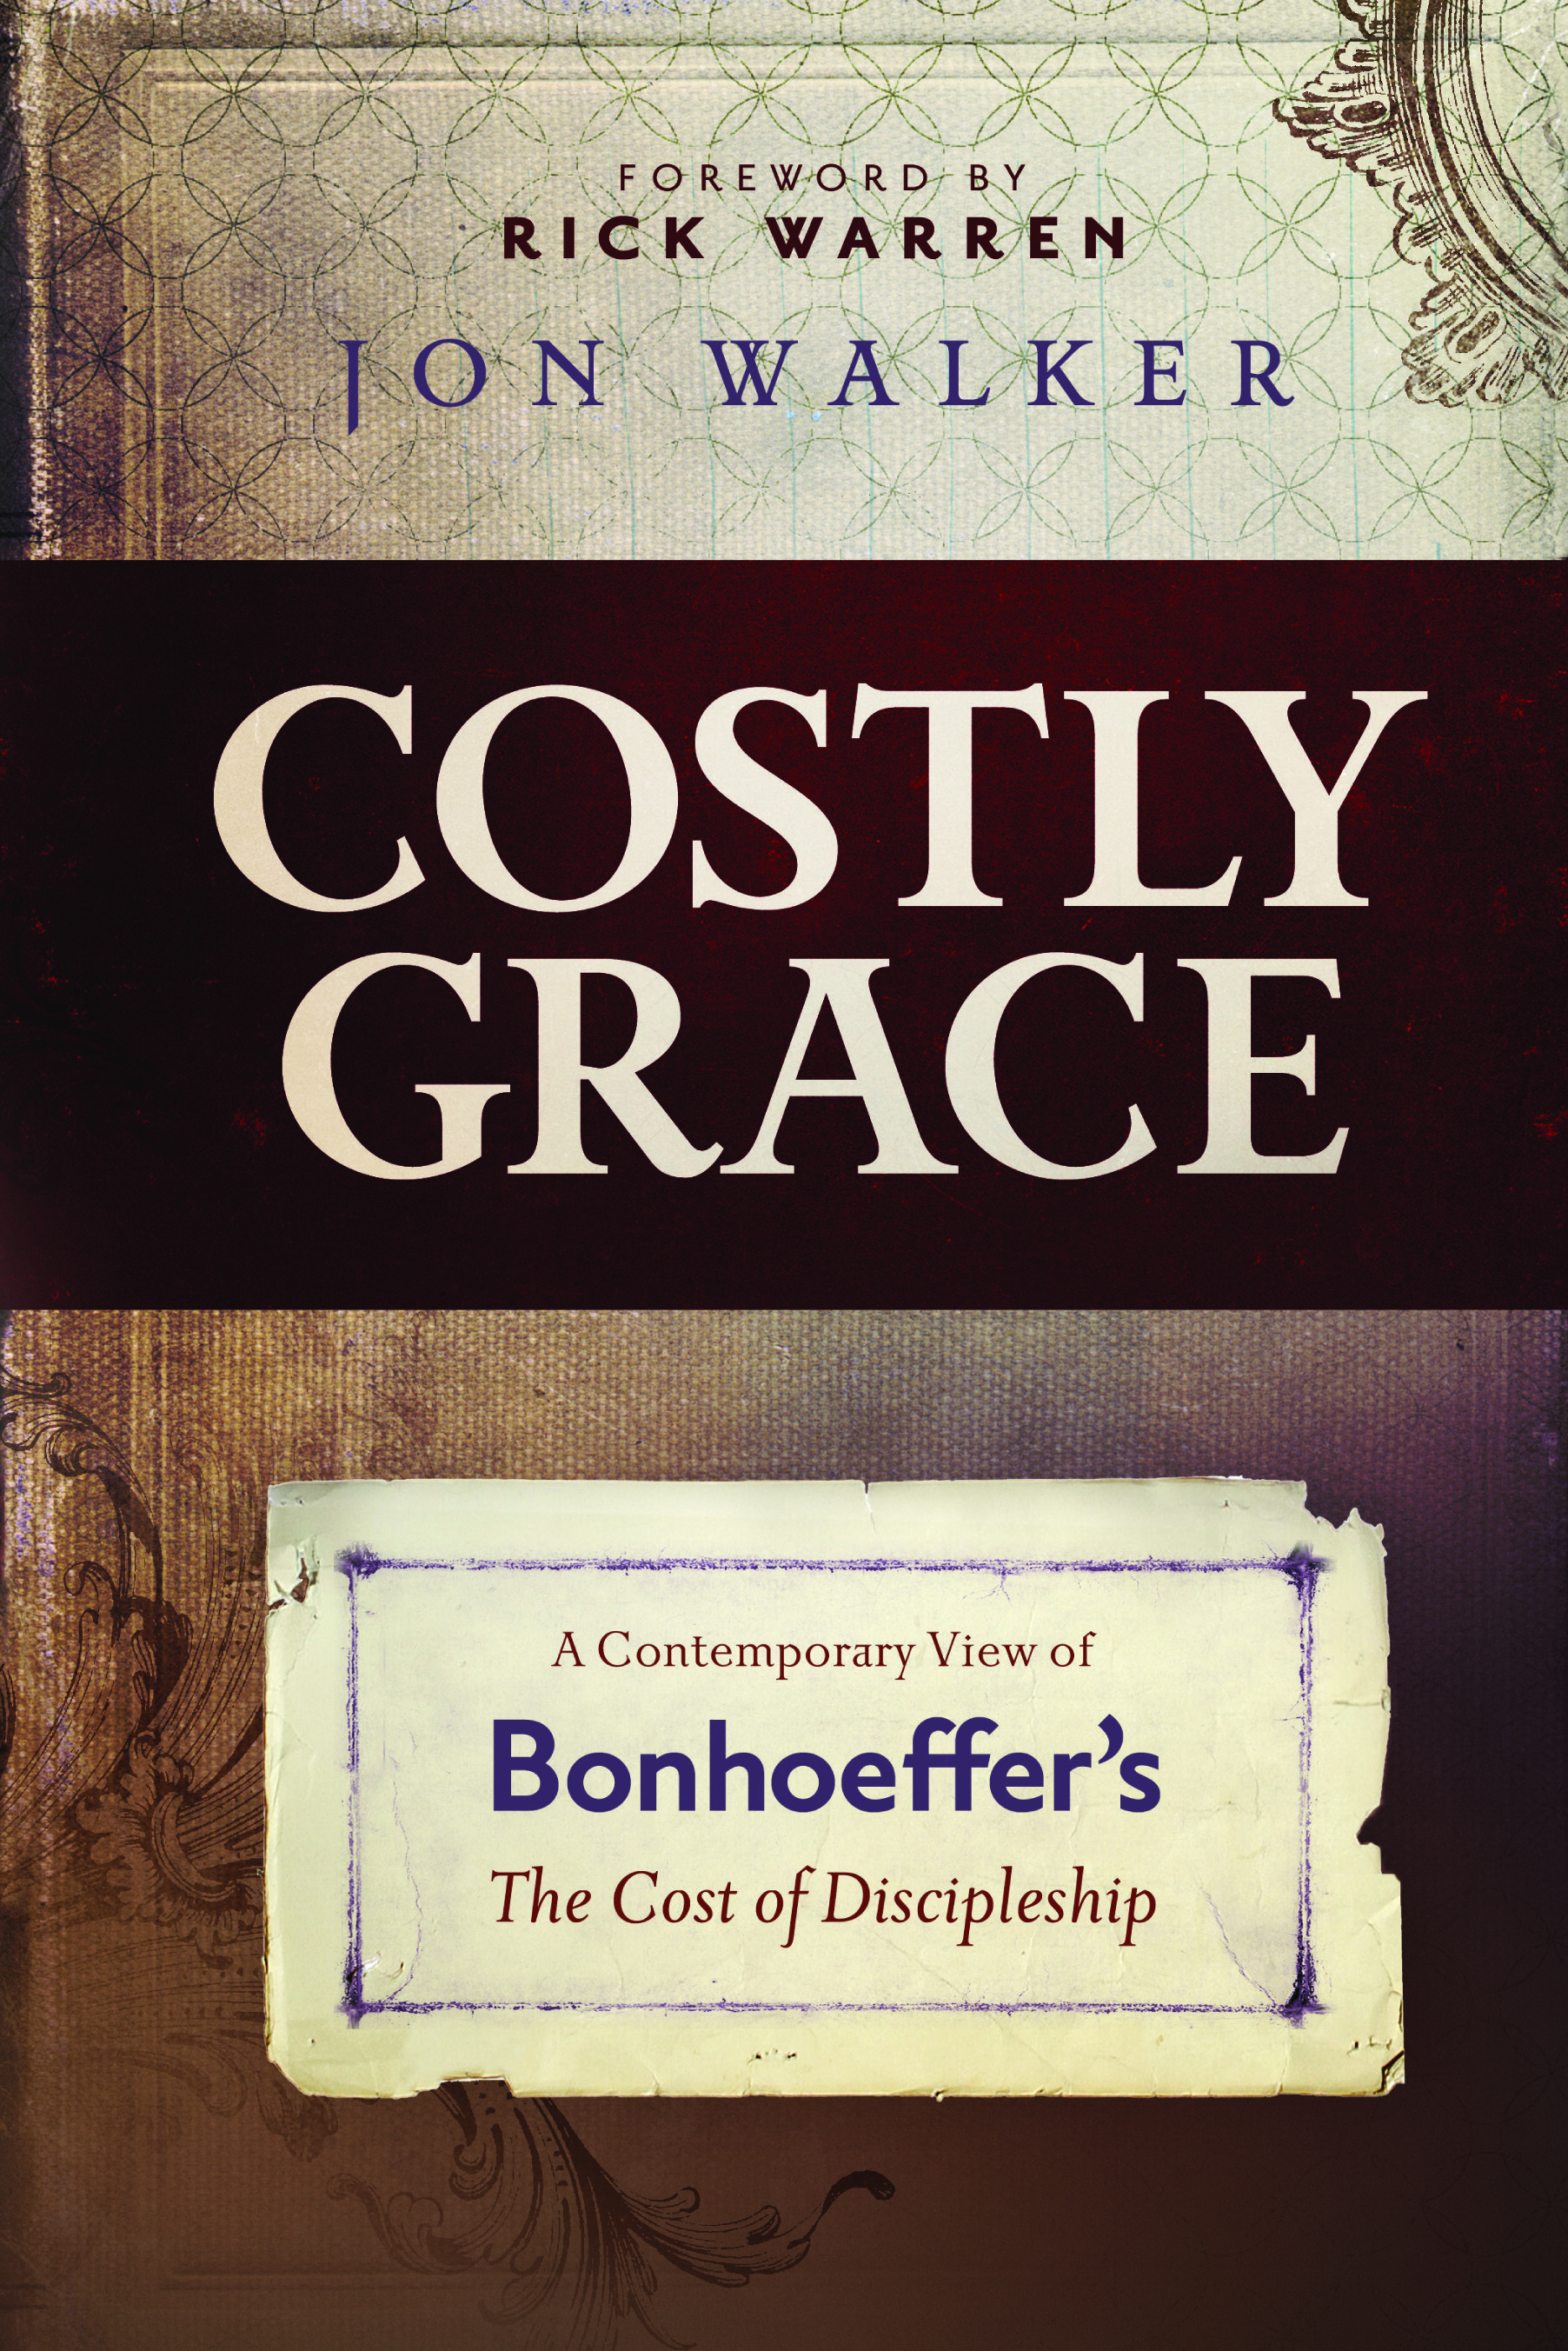 Costly Grace: A Contemporary View of Bonhoeffer's The Cost of Discipleship